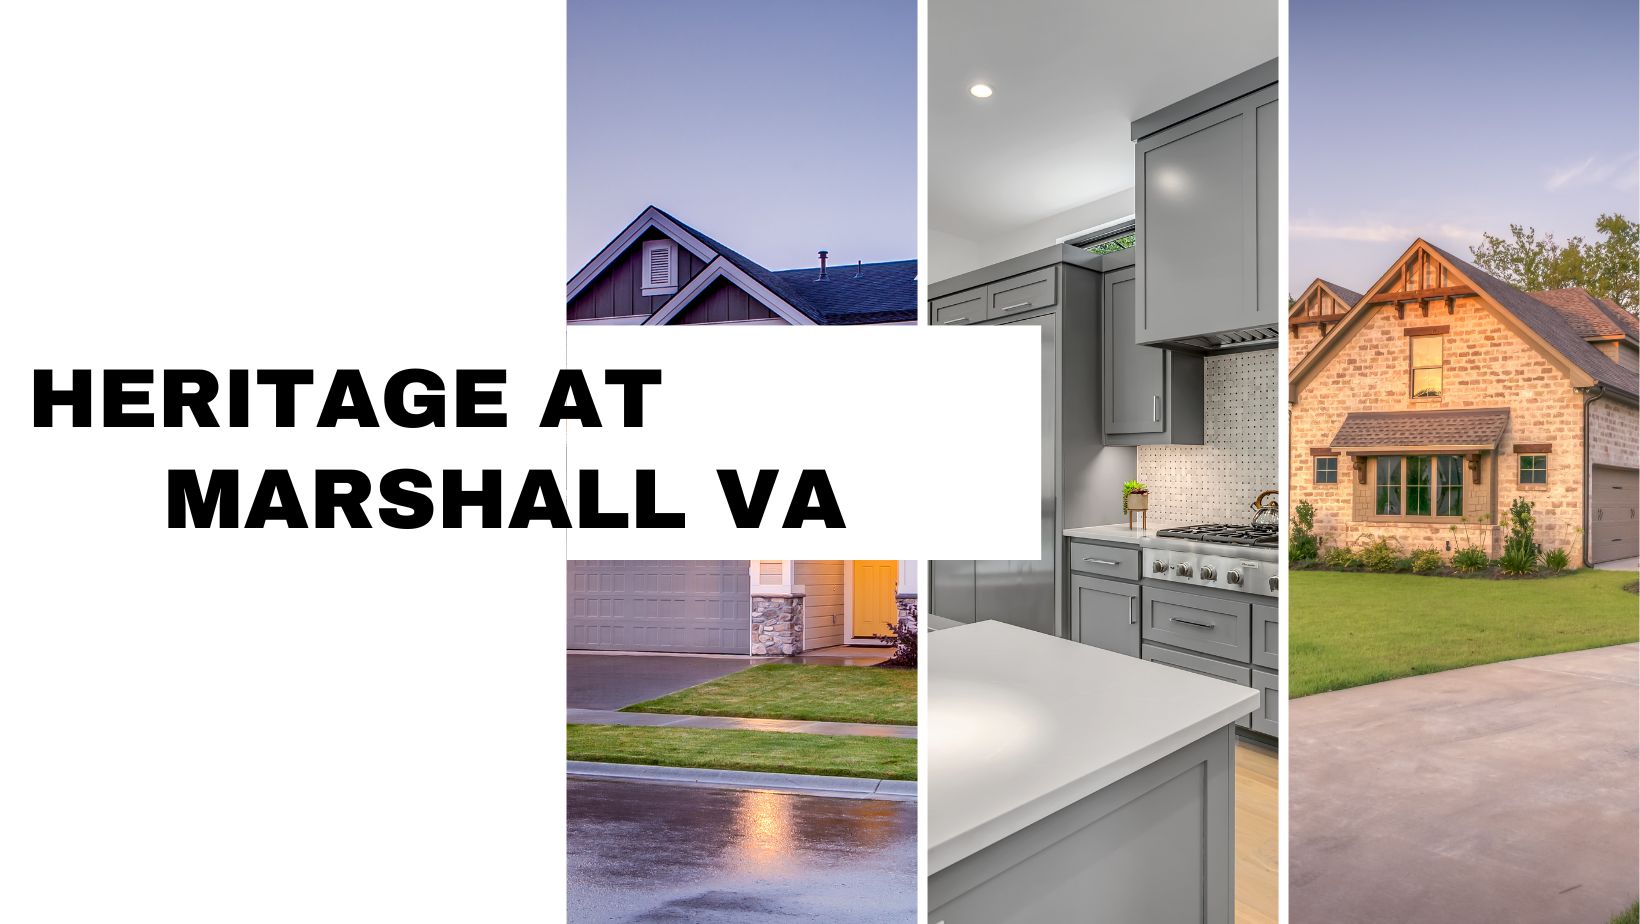 Heritage at Marshall Homes for Sale in Fauquier County